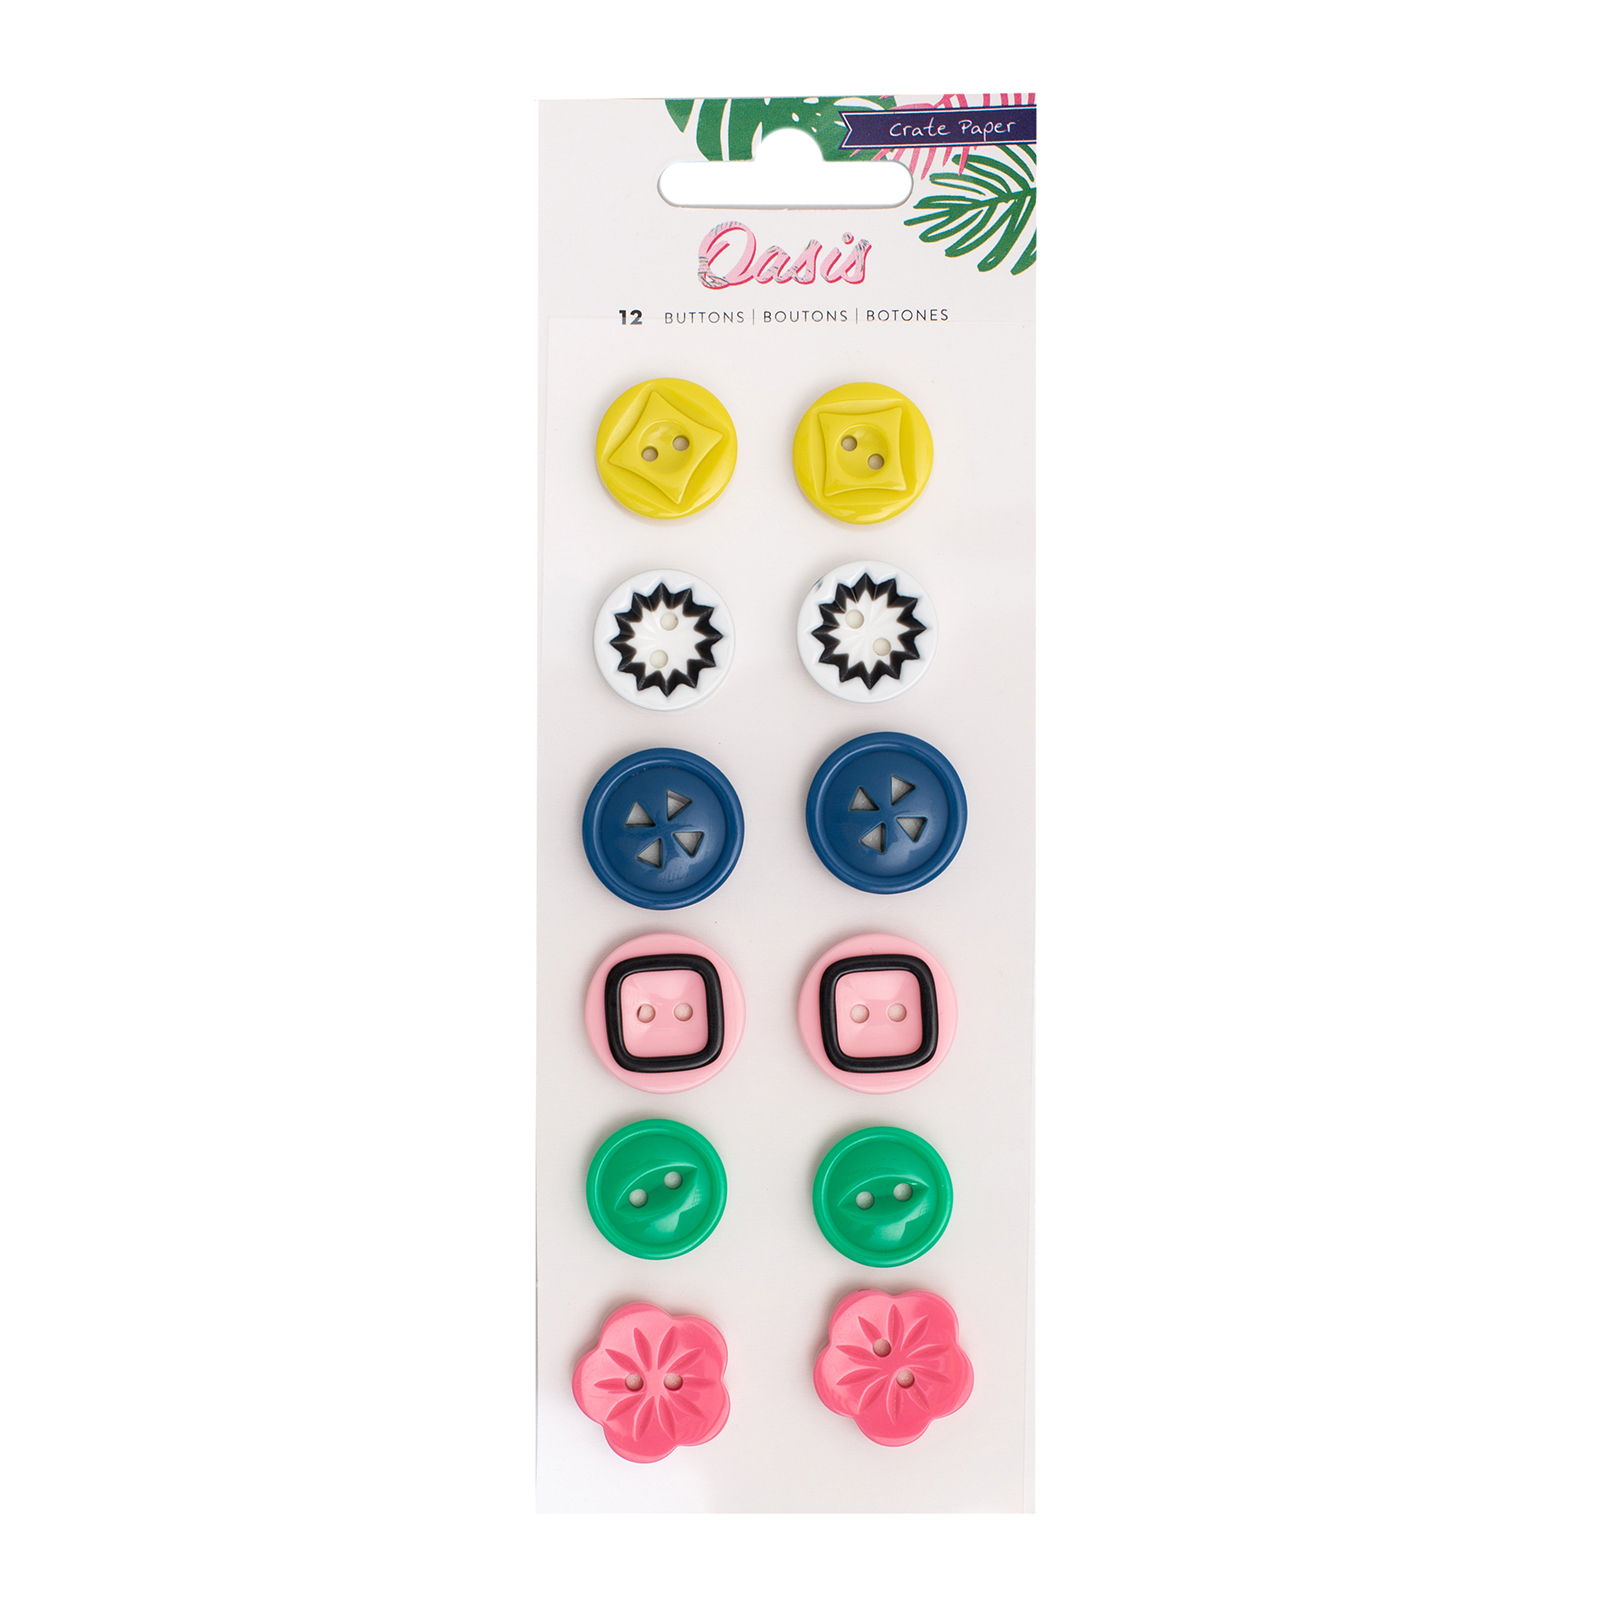 Crate paper • Oasis embellishment buttons x12